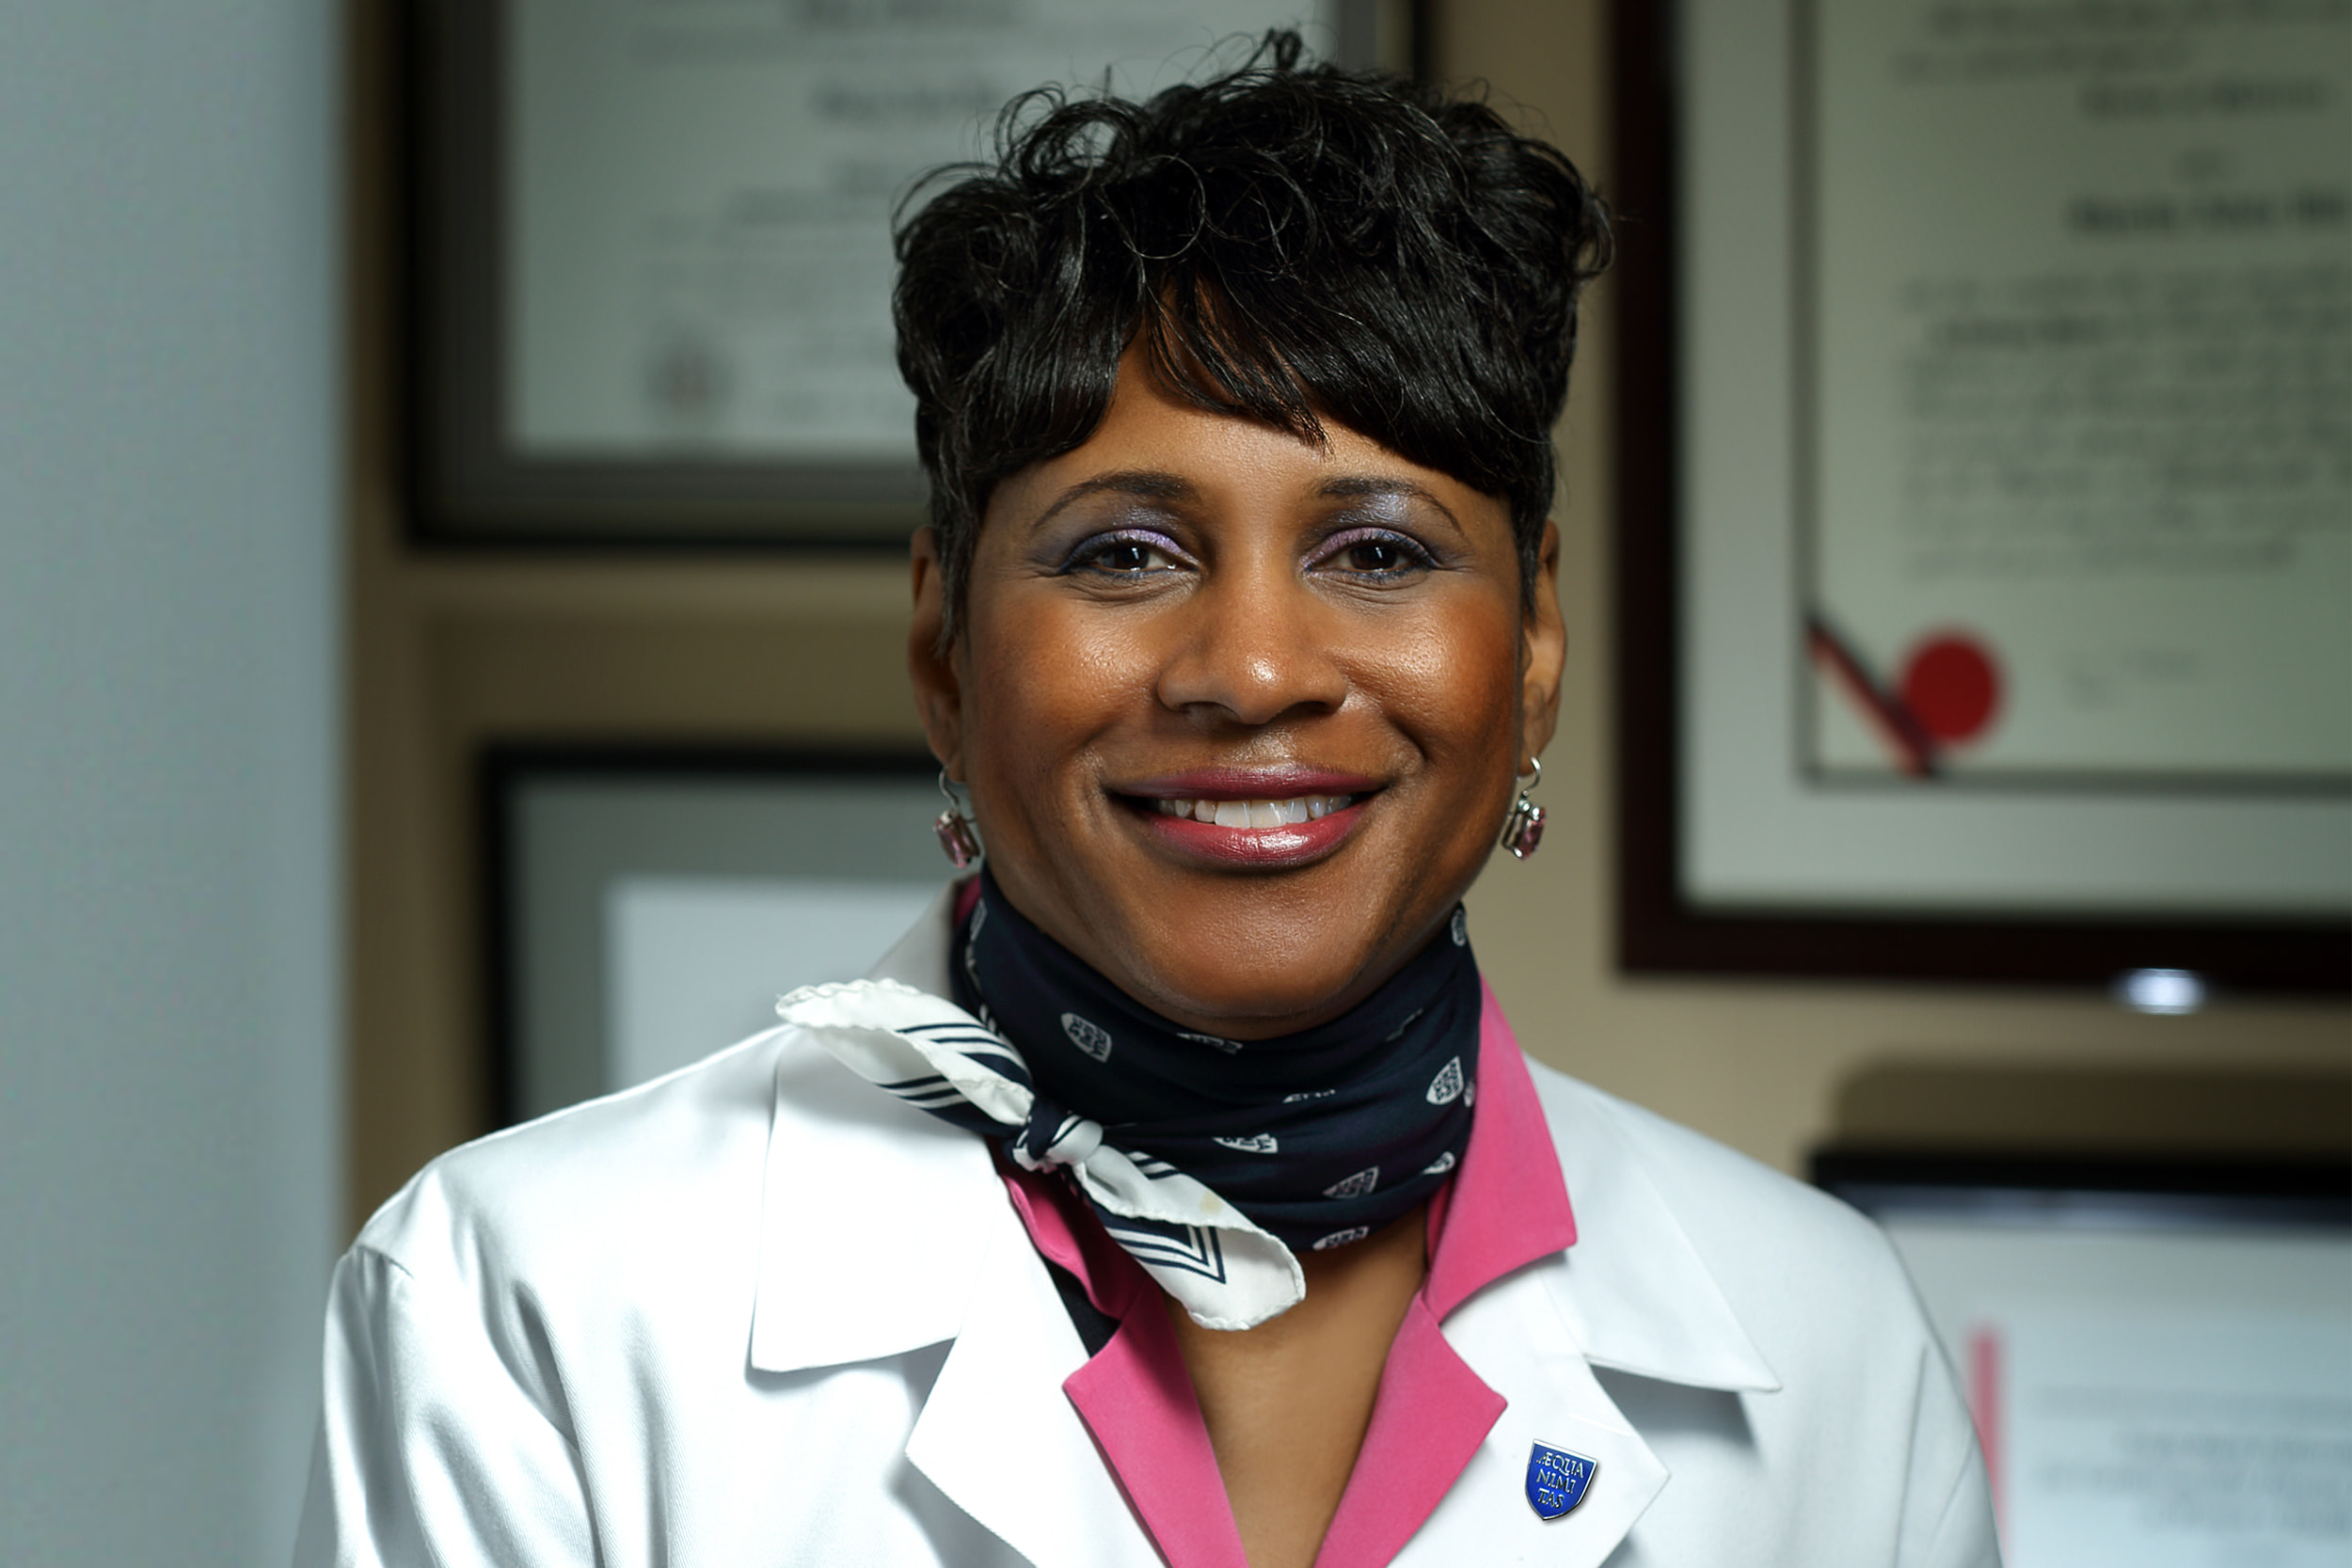 Groundbreaking Diabetes Physician Selected as UVA’s 2019 Distinguished Alumna